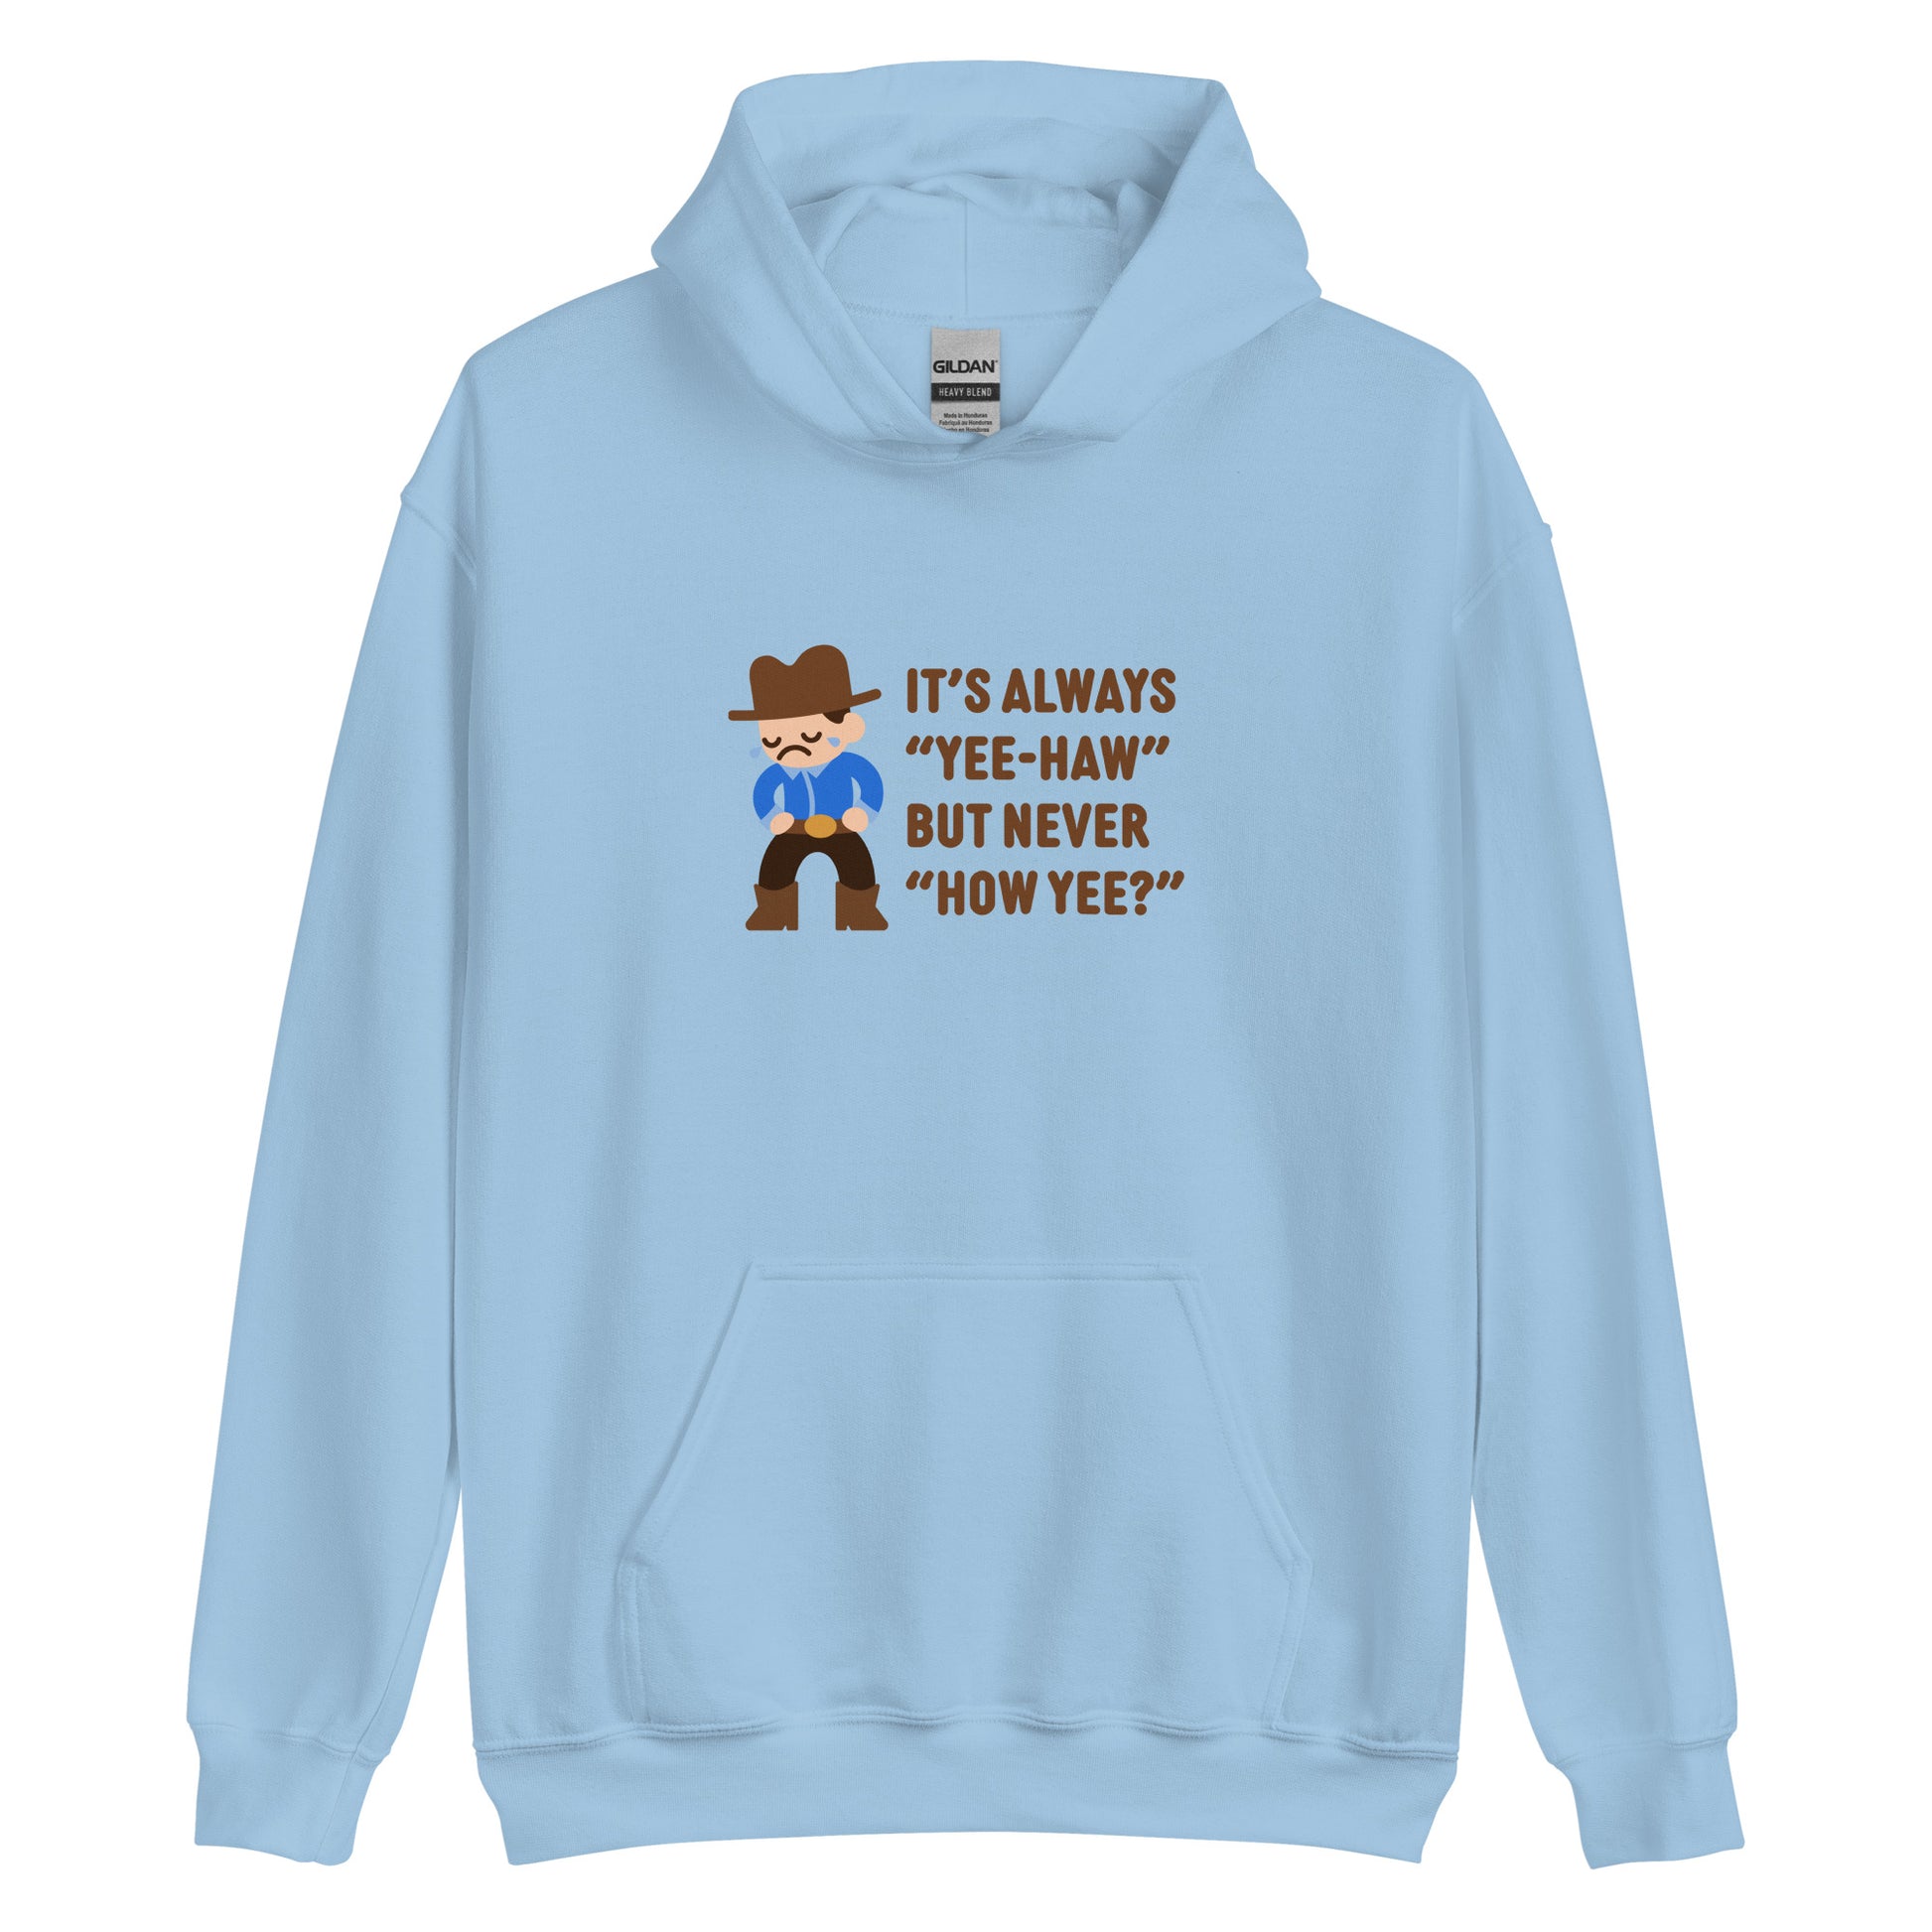 A light blue hooded sweatshirt featuring an illustration of a crying cowboy wearing a blue shirt. Text alongside the cowboy reads "It's always "yee-haw" but never "How yee?""